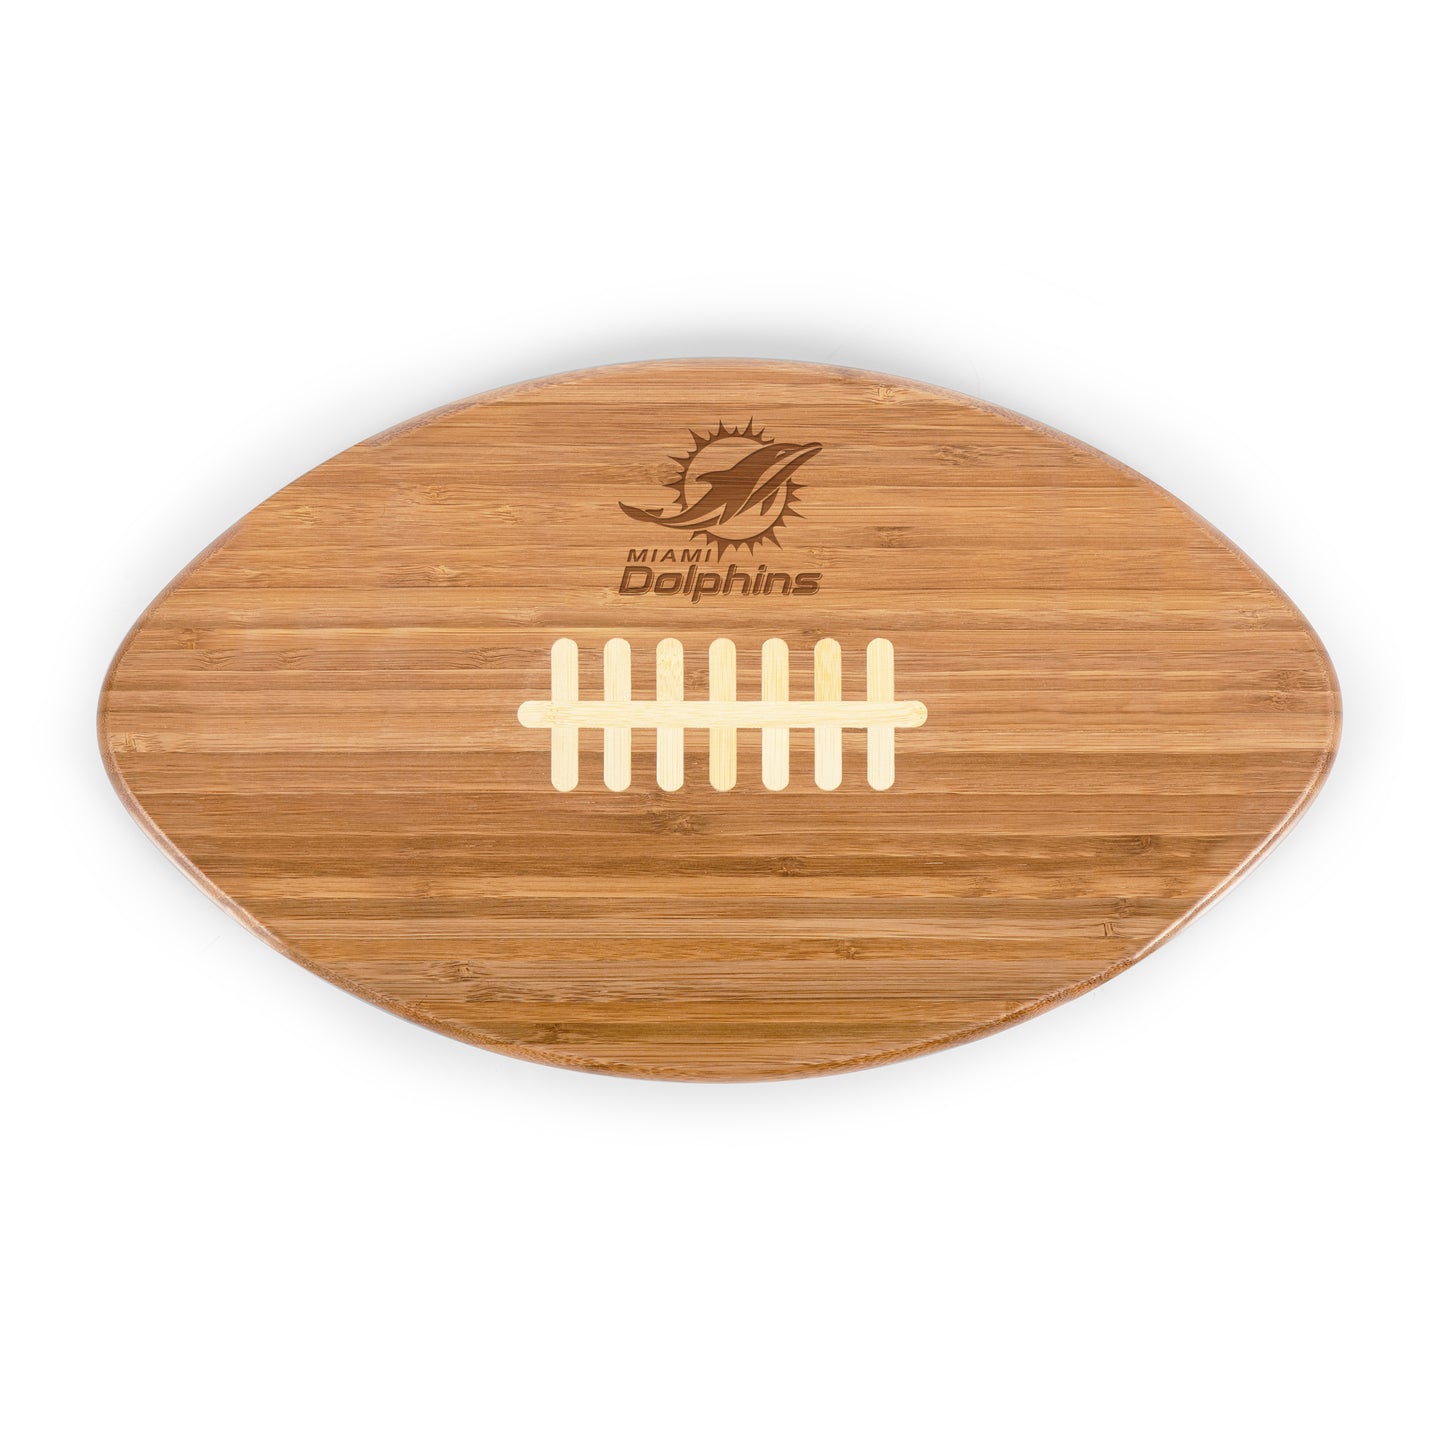 Miami Dolphins - Touchdown! Football Cutting Board & Serving Tray